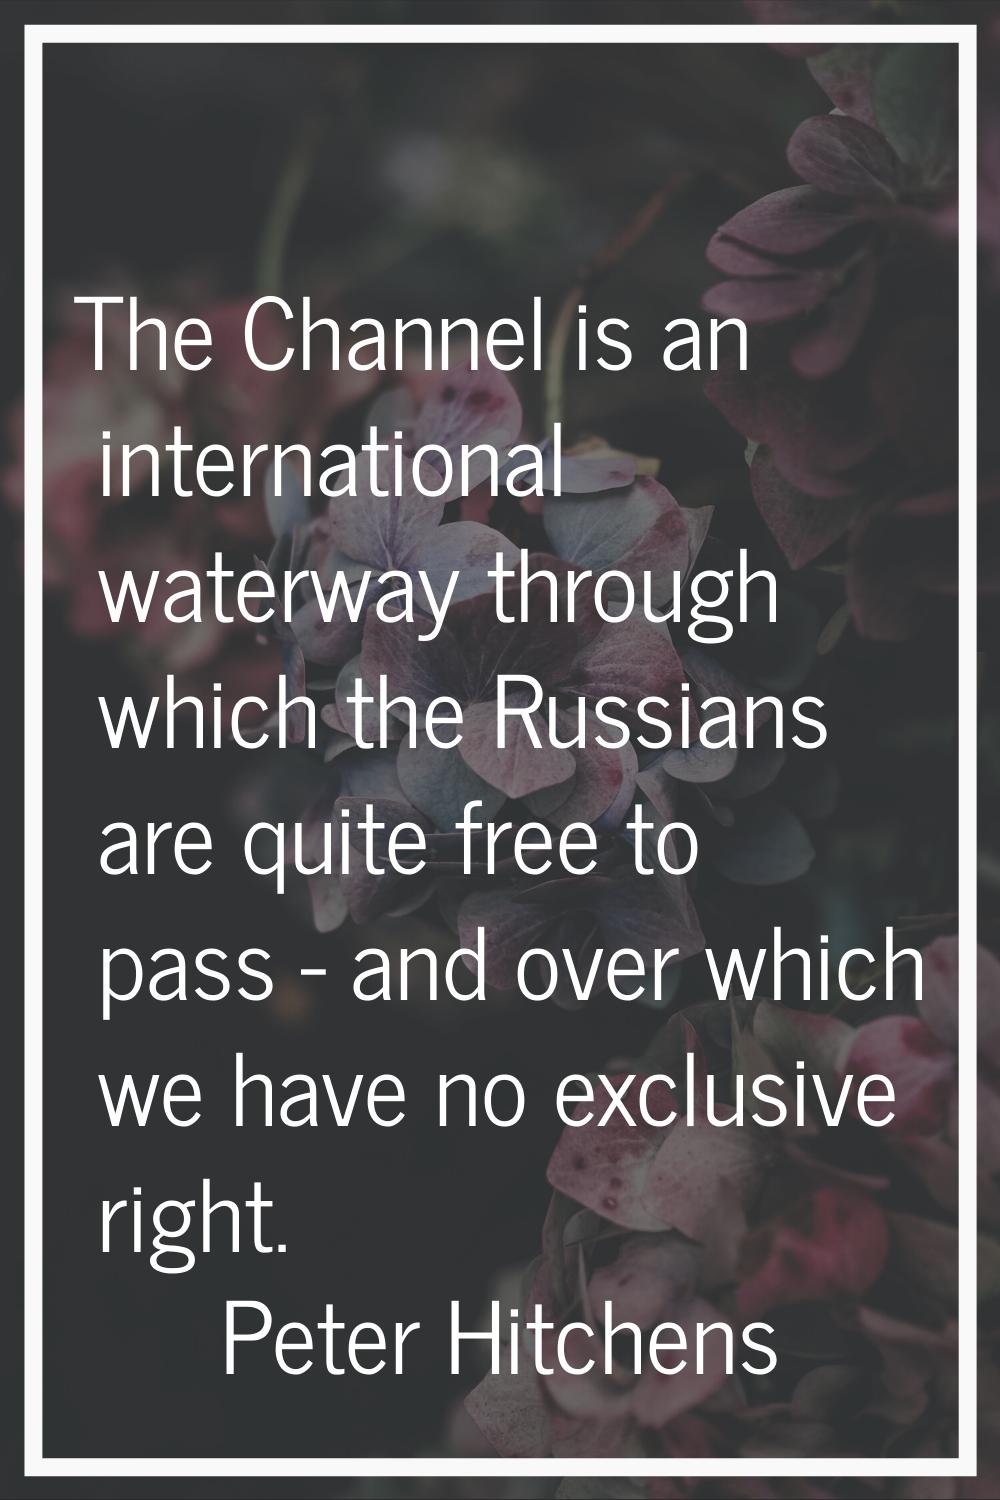 The Channel is an international waterway through which the Russians are quite free to pass - and ov